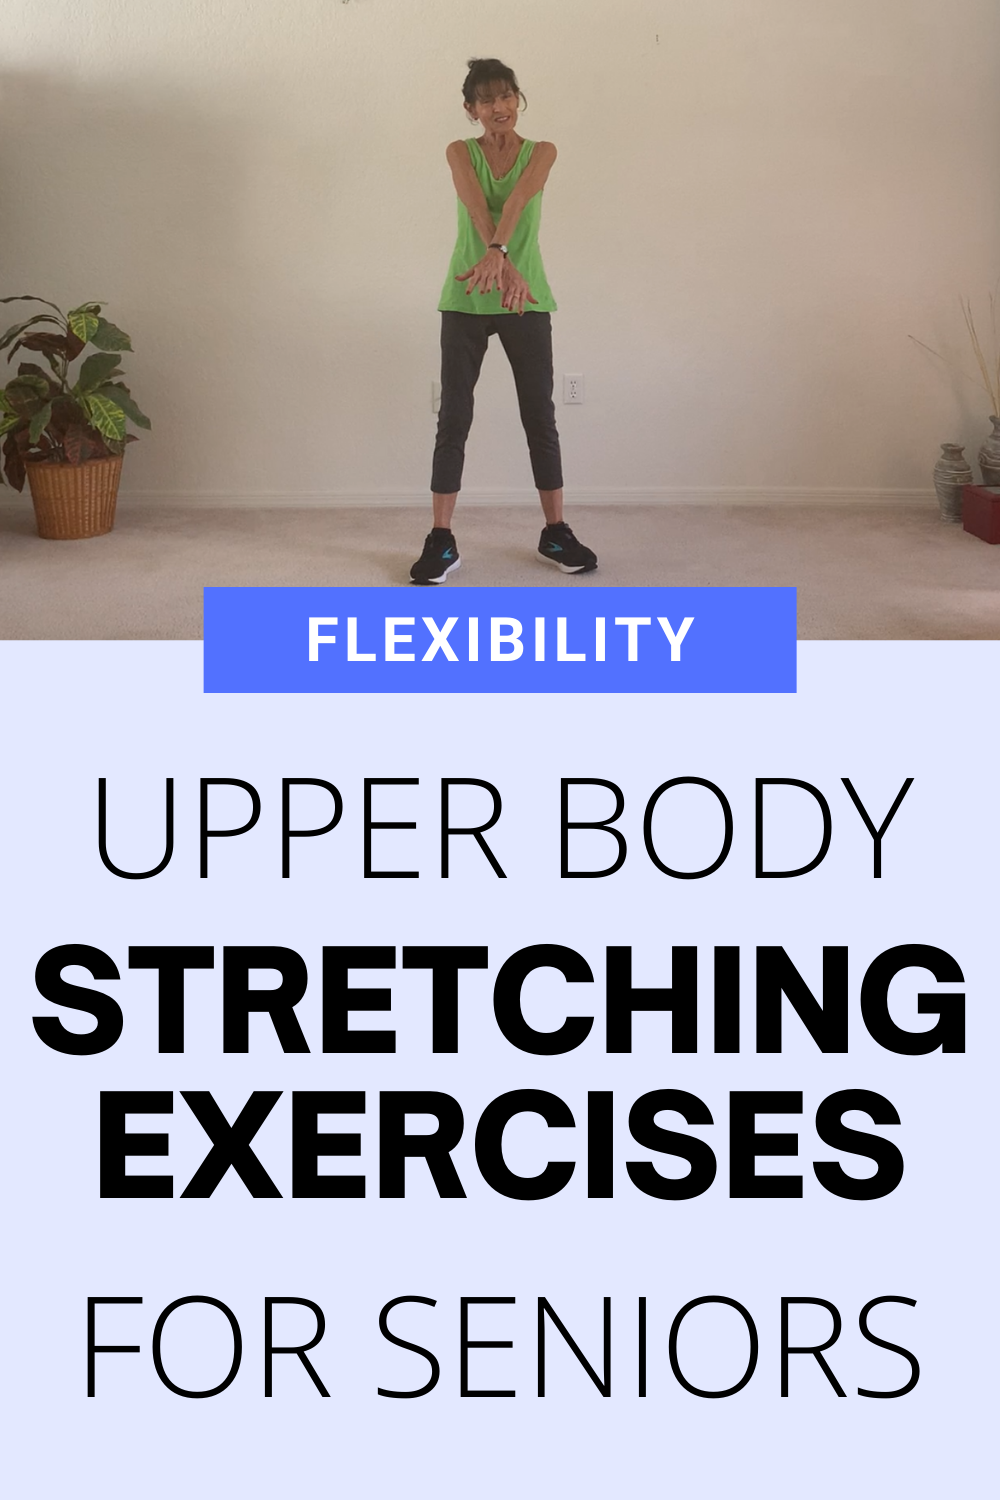 Stretching Exercises For Seniors - Upper Body - Fitness With Cindy